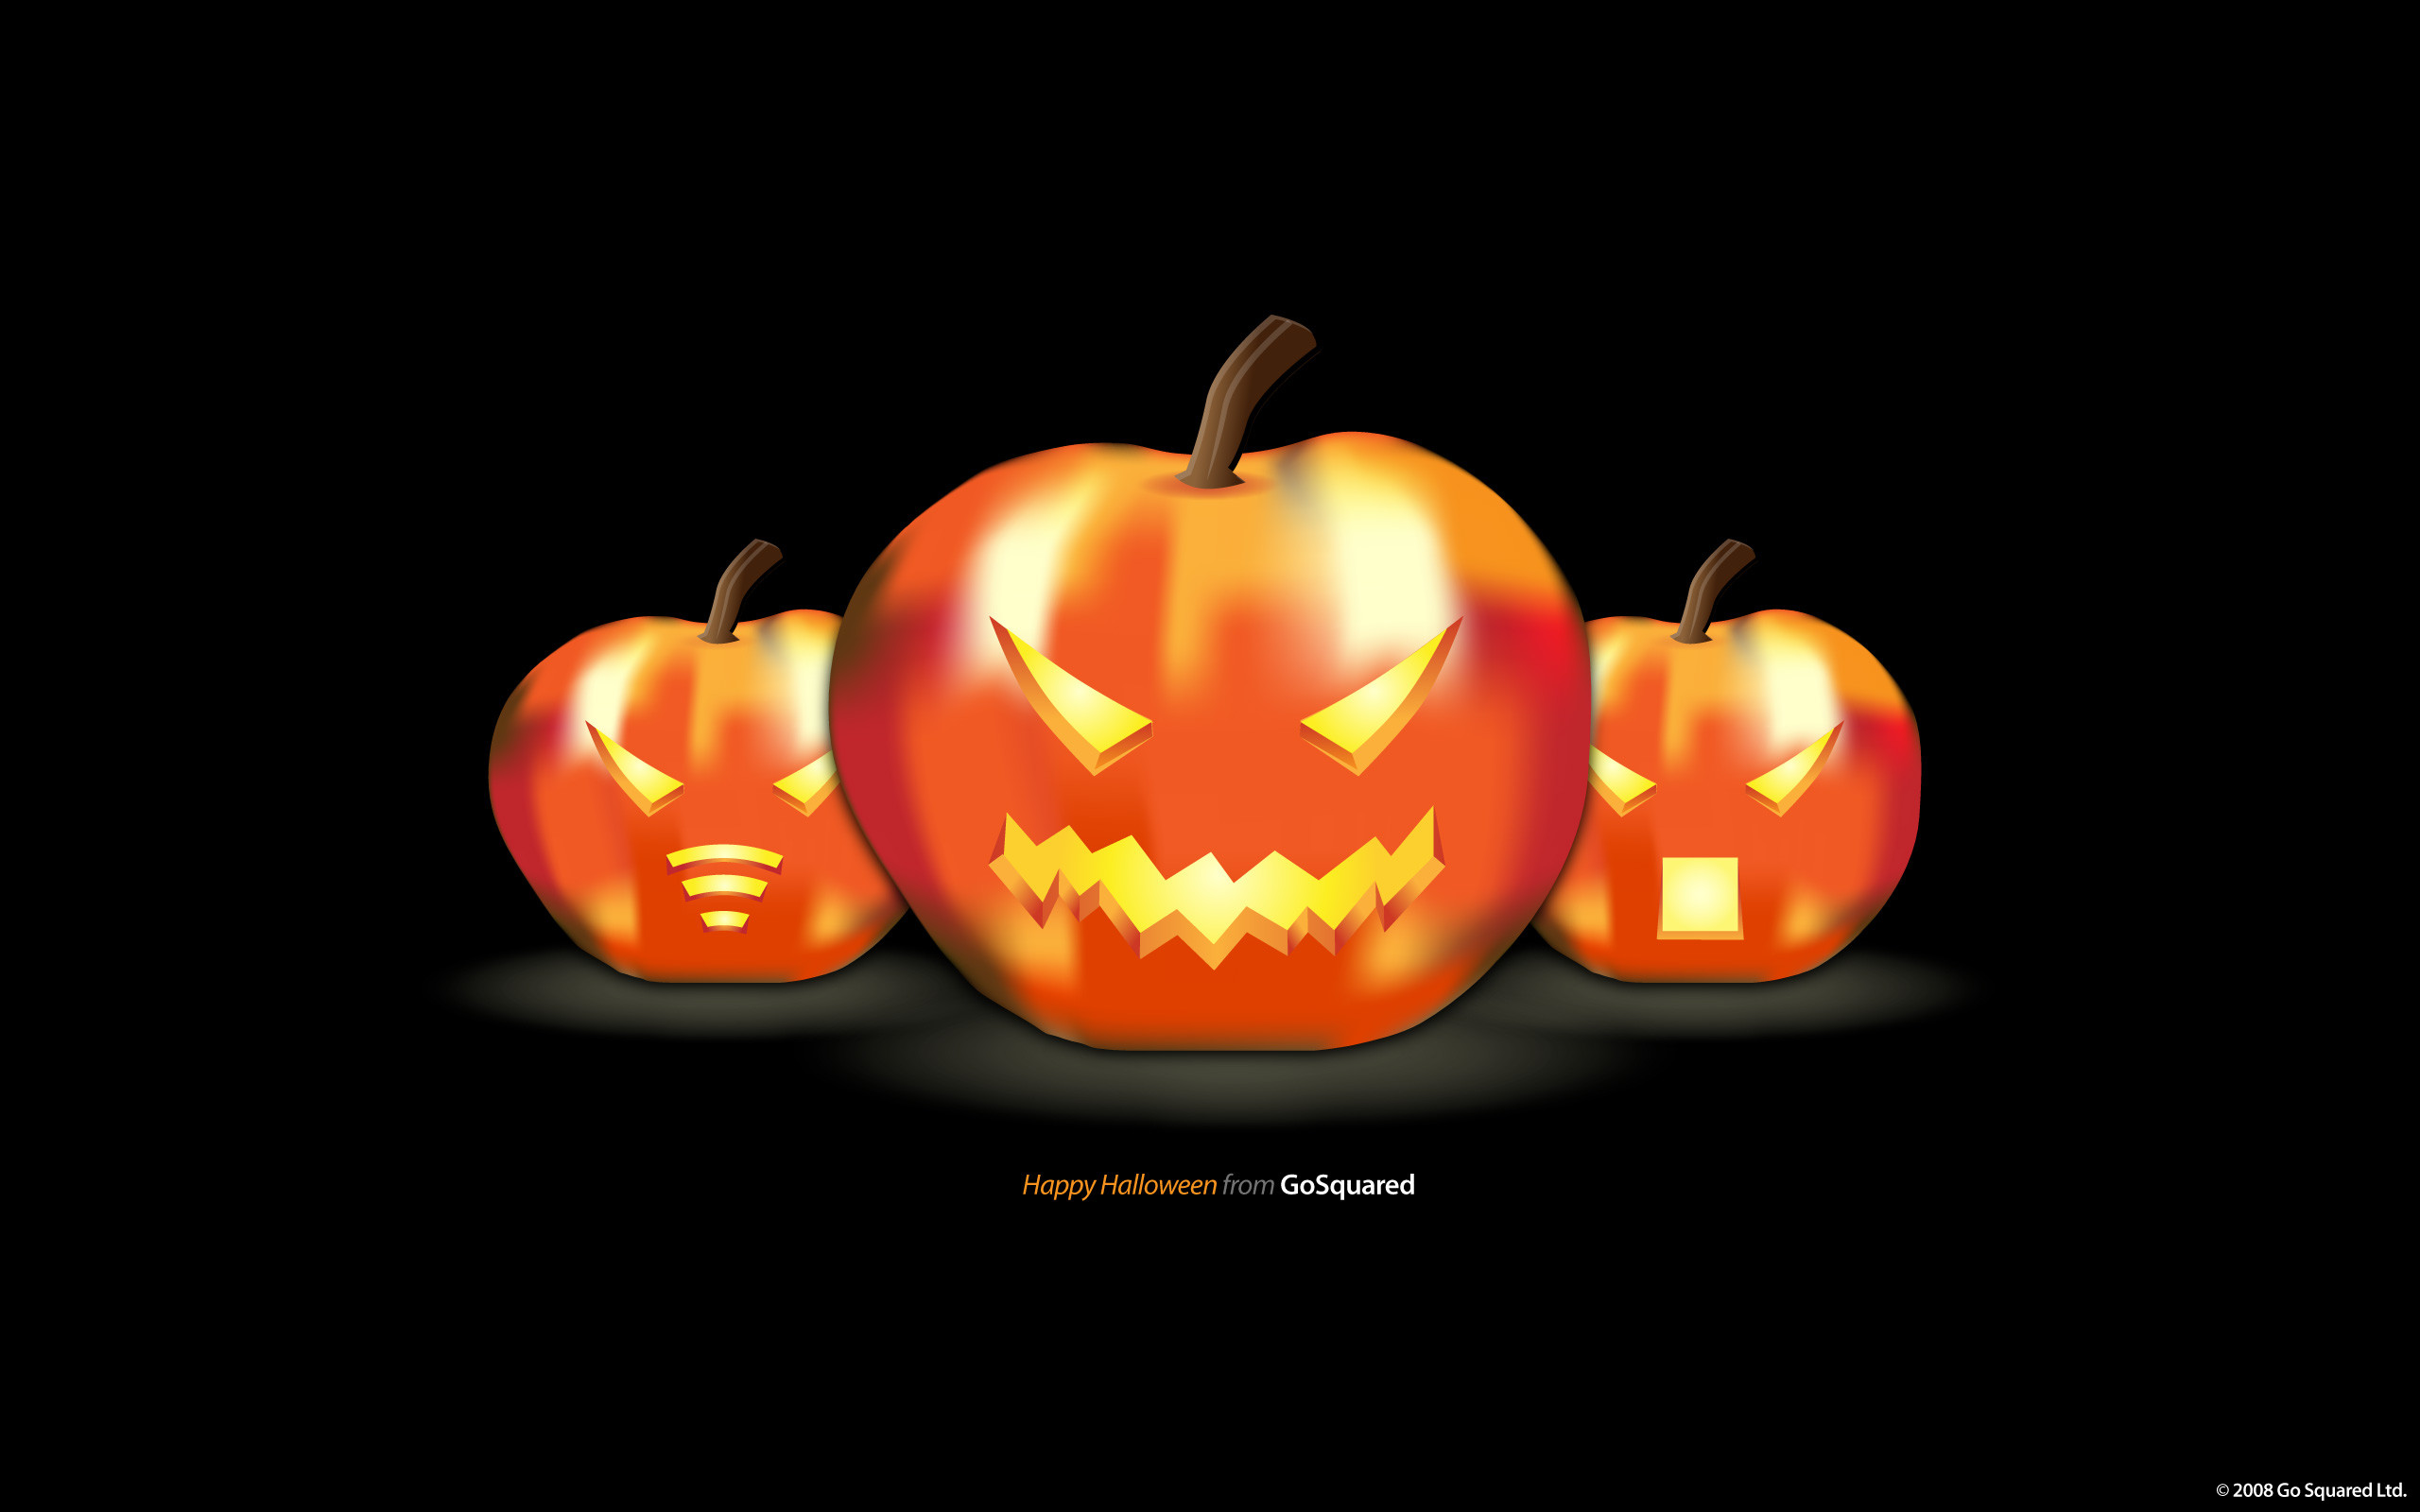 2560x1600 Here's a wallpaper to say Happy Halloween from GoSquared